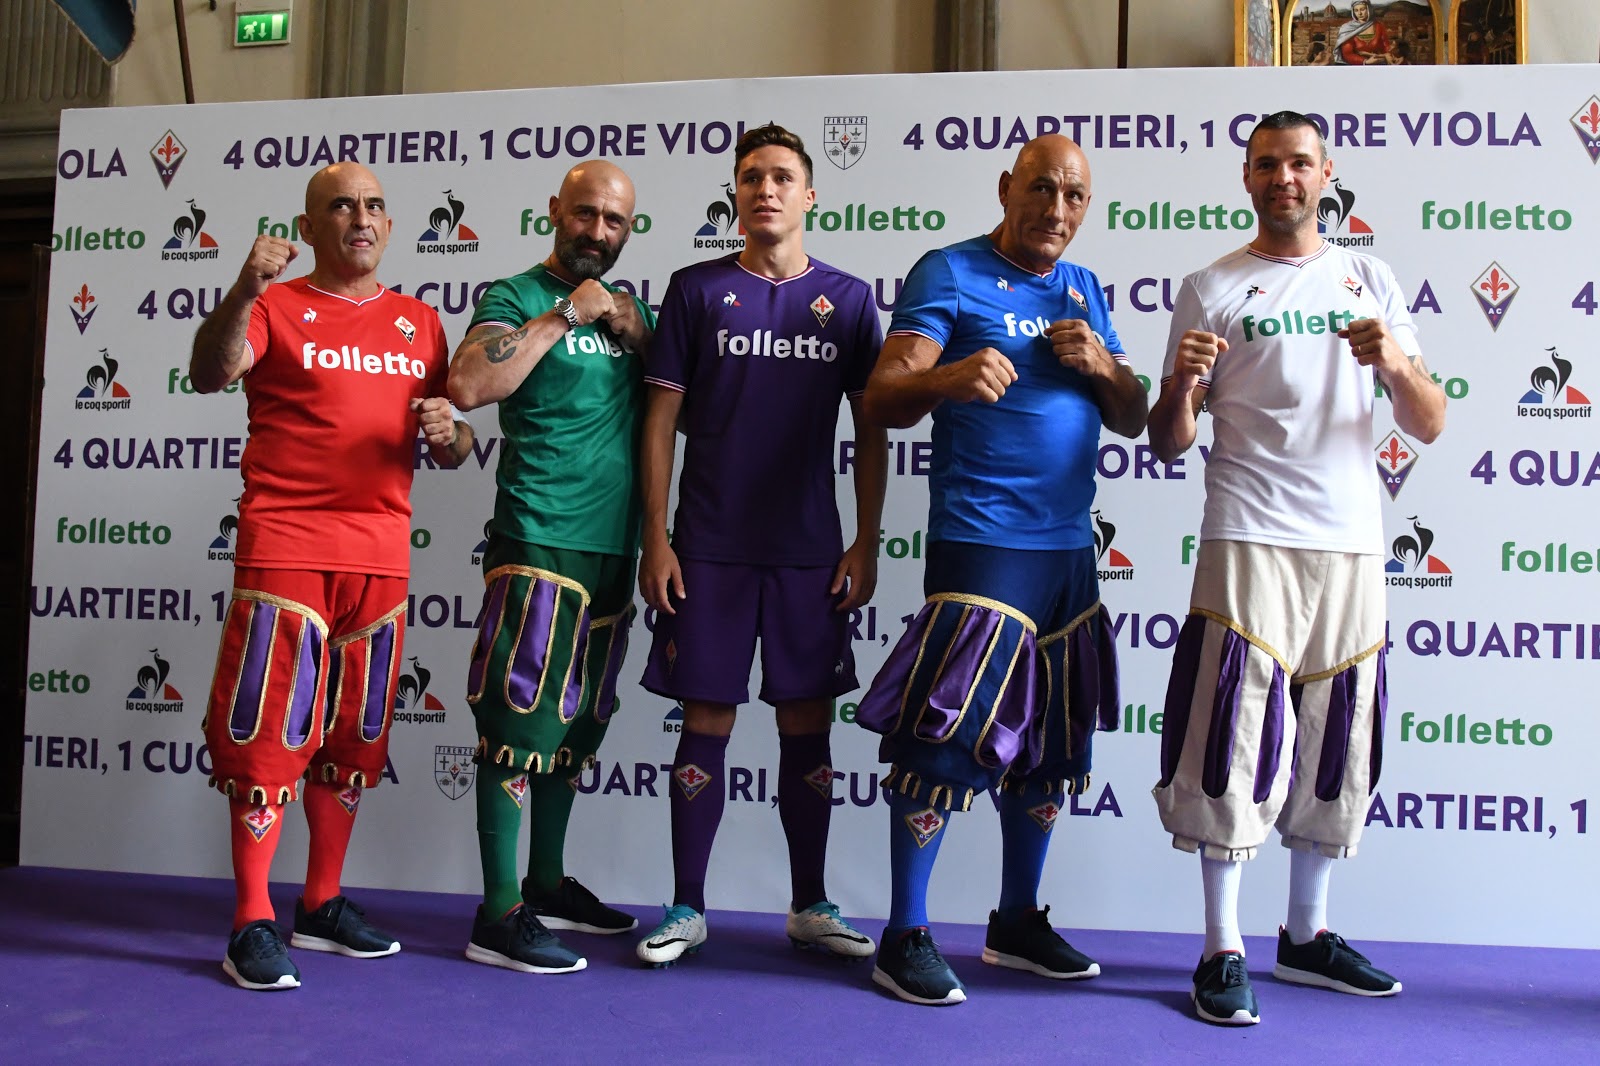 first-club-with-5-player-kits-acf-fiorentina-17-18-home-and-4-away-kits%2B%25281%2529.jpg